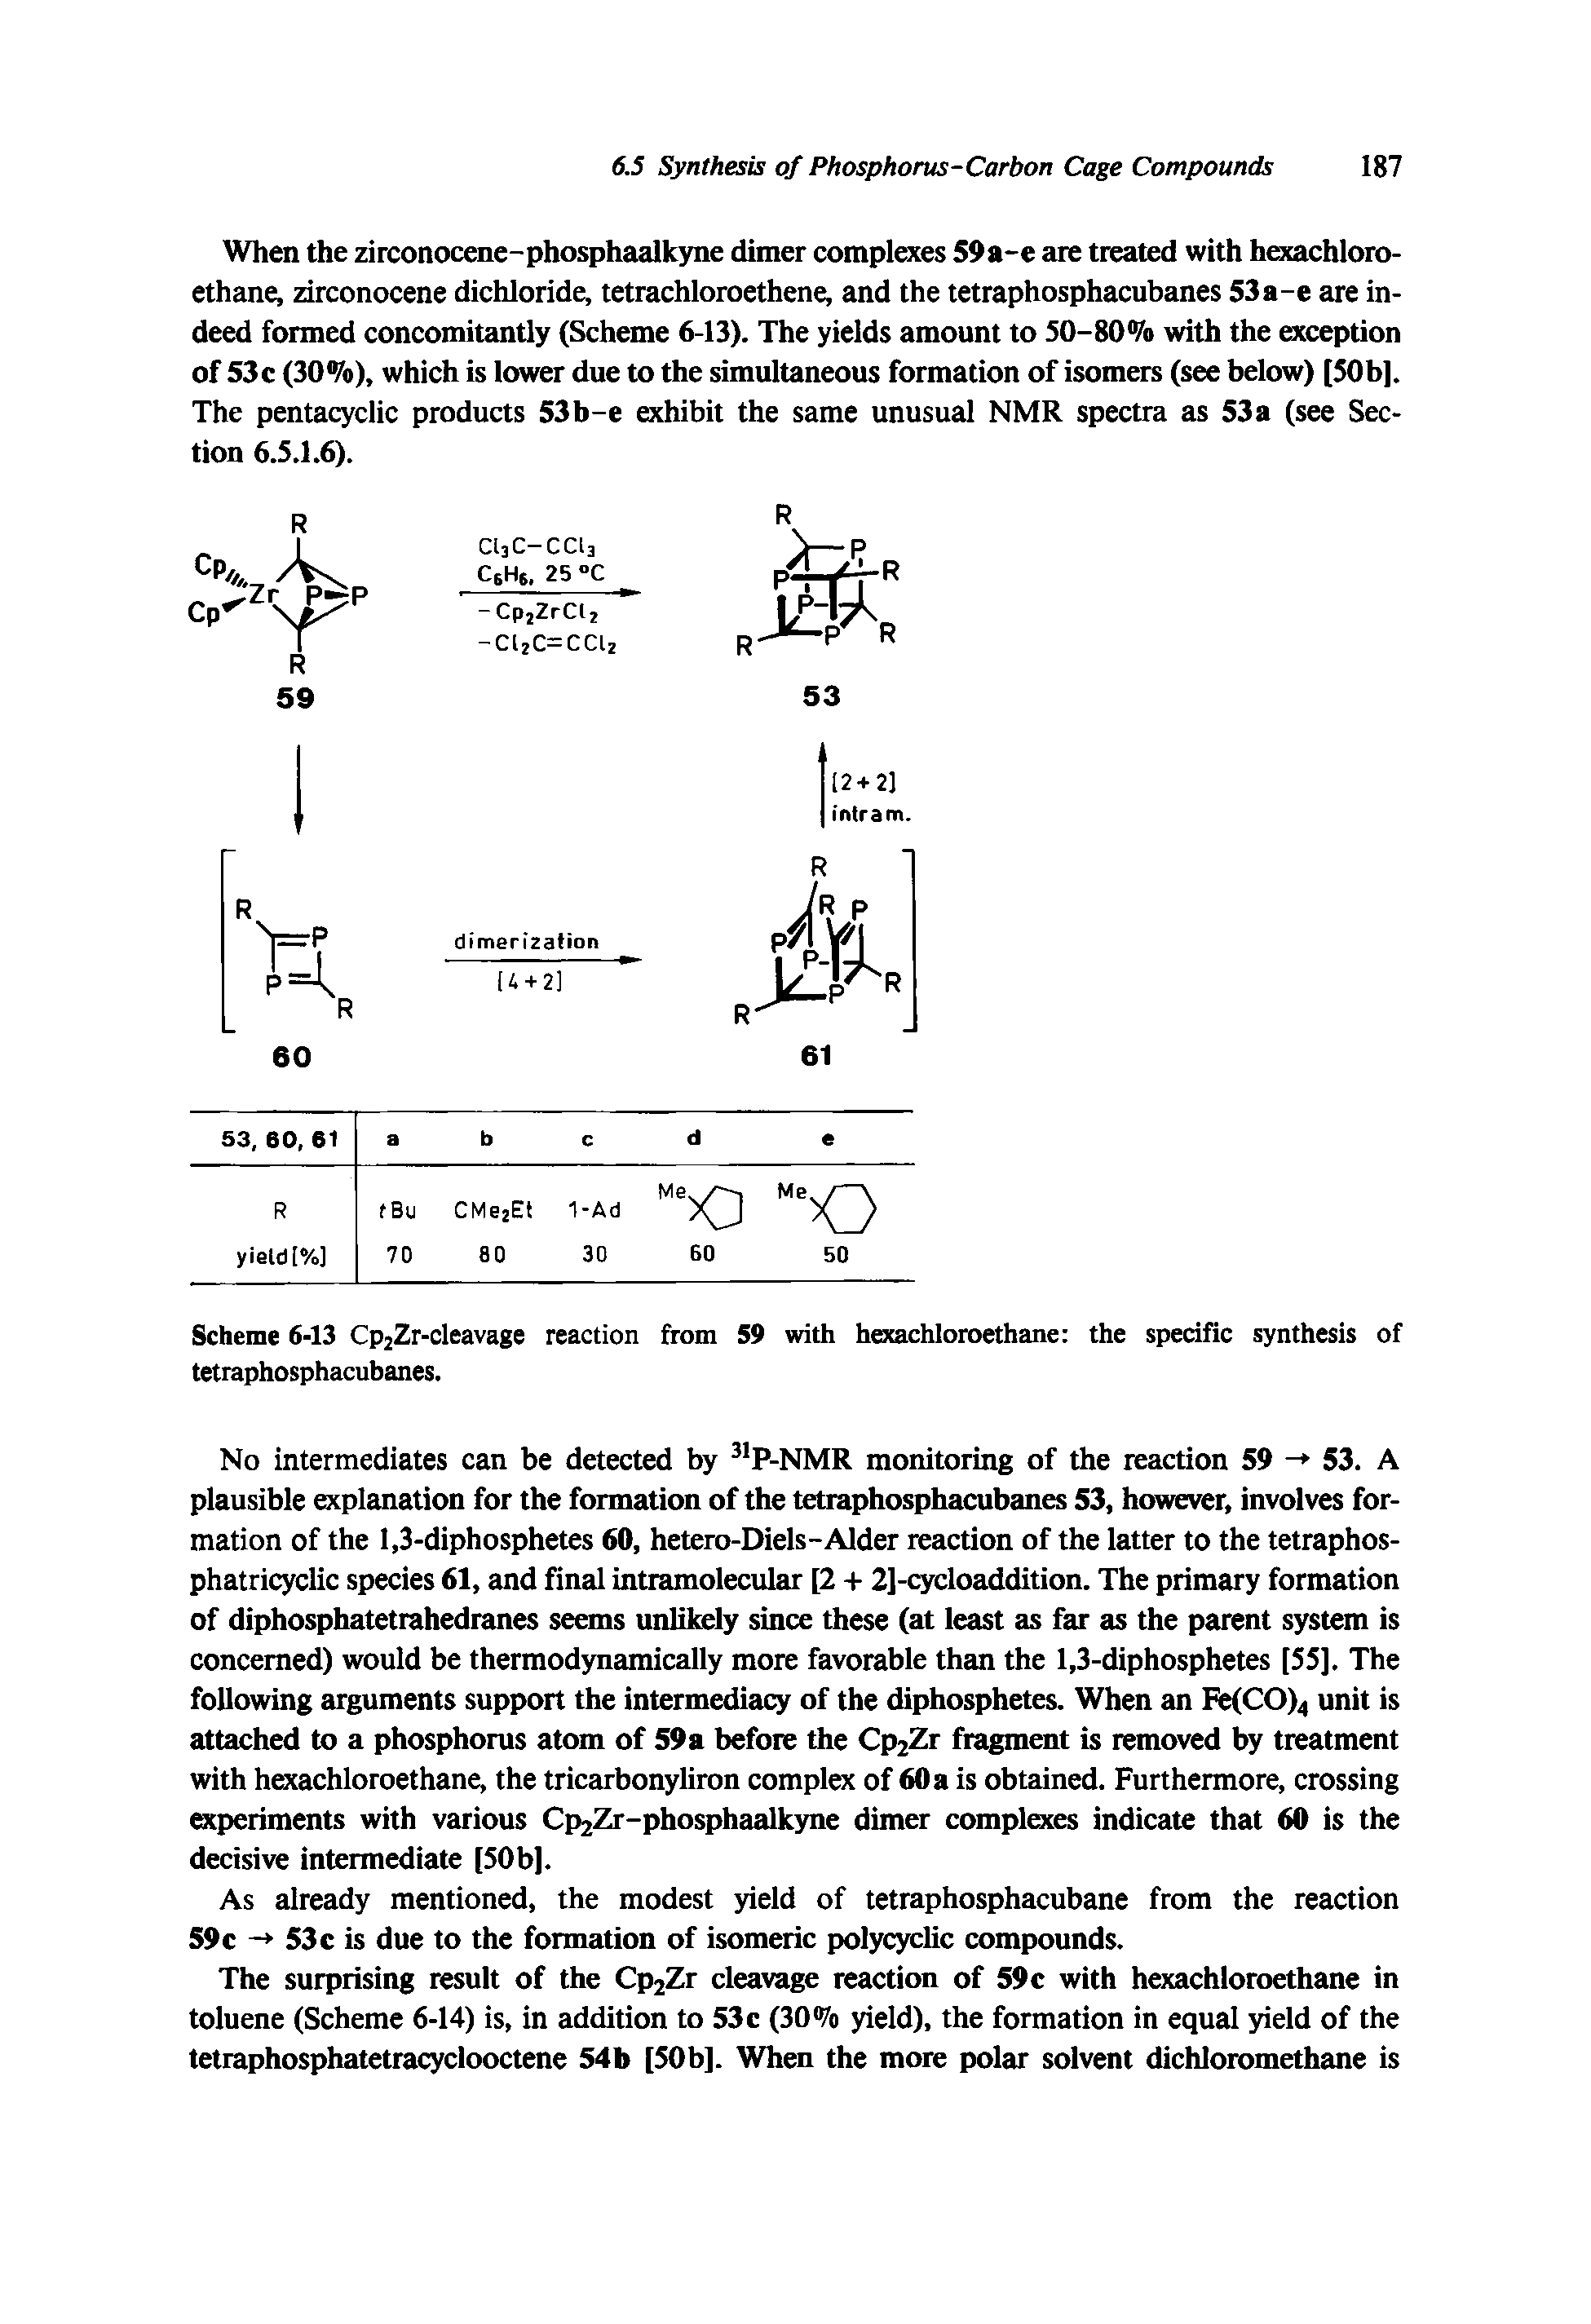 Scheme 6-13 Cp2Zr-cleavage reaction from 59 with hexachloroethane the specific synthesis of tetraphosphacubanes.